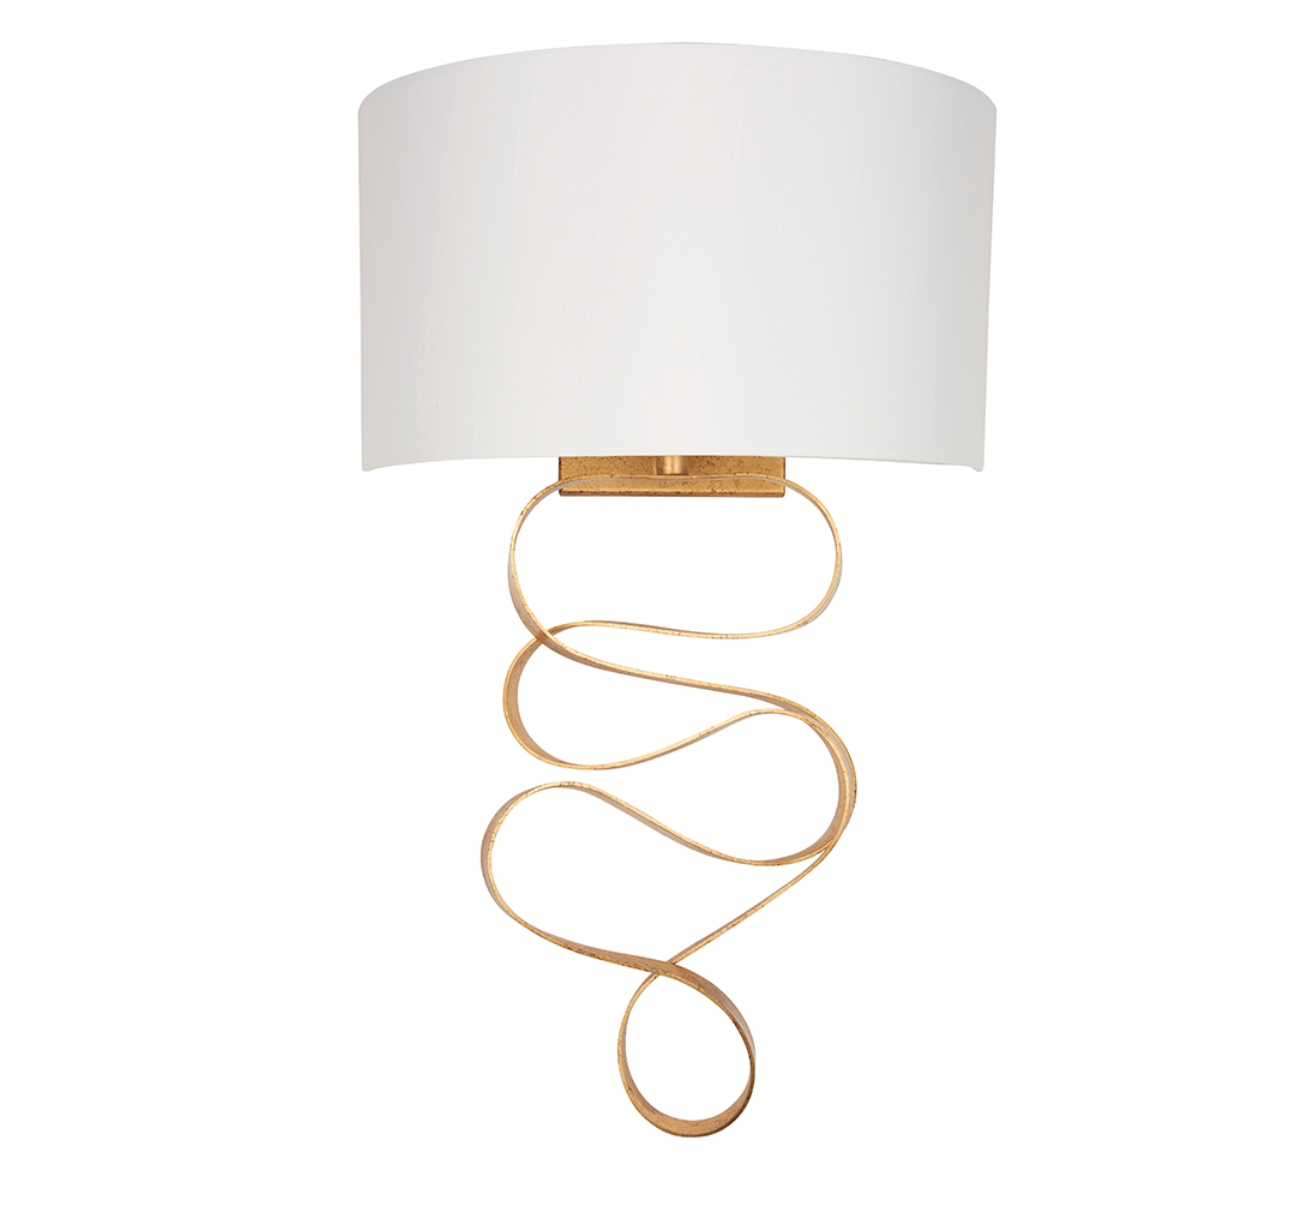 Gold ribbon wall light with ivory shade - ID 11724